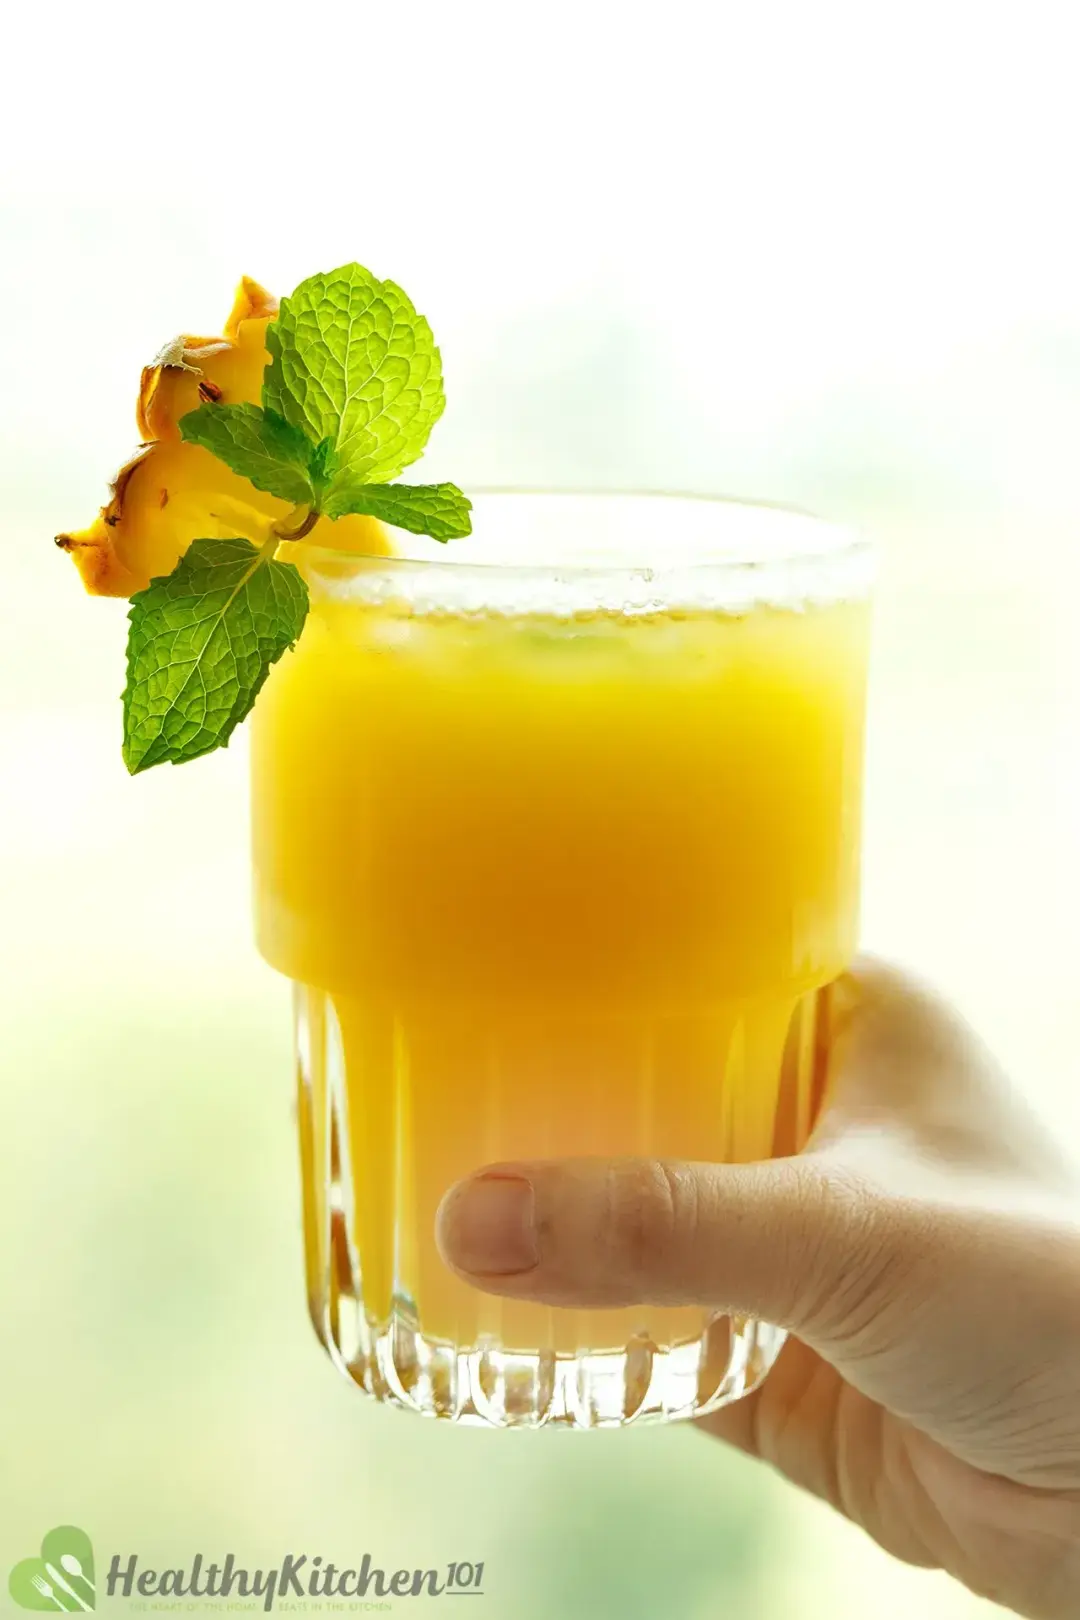 A hand holding a glass of pineapple juice and cider cocktail near a window